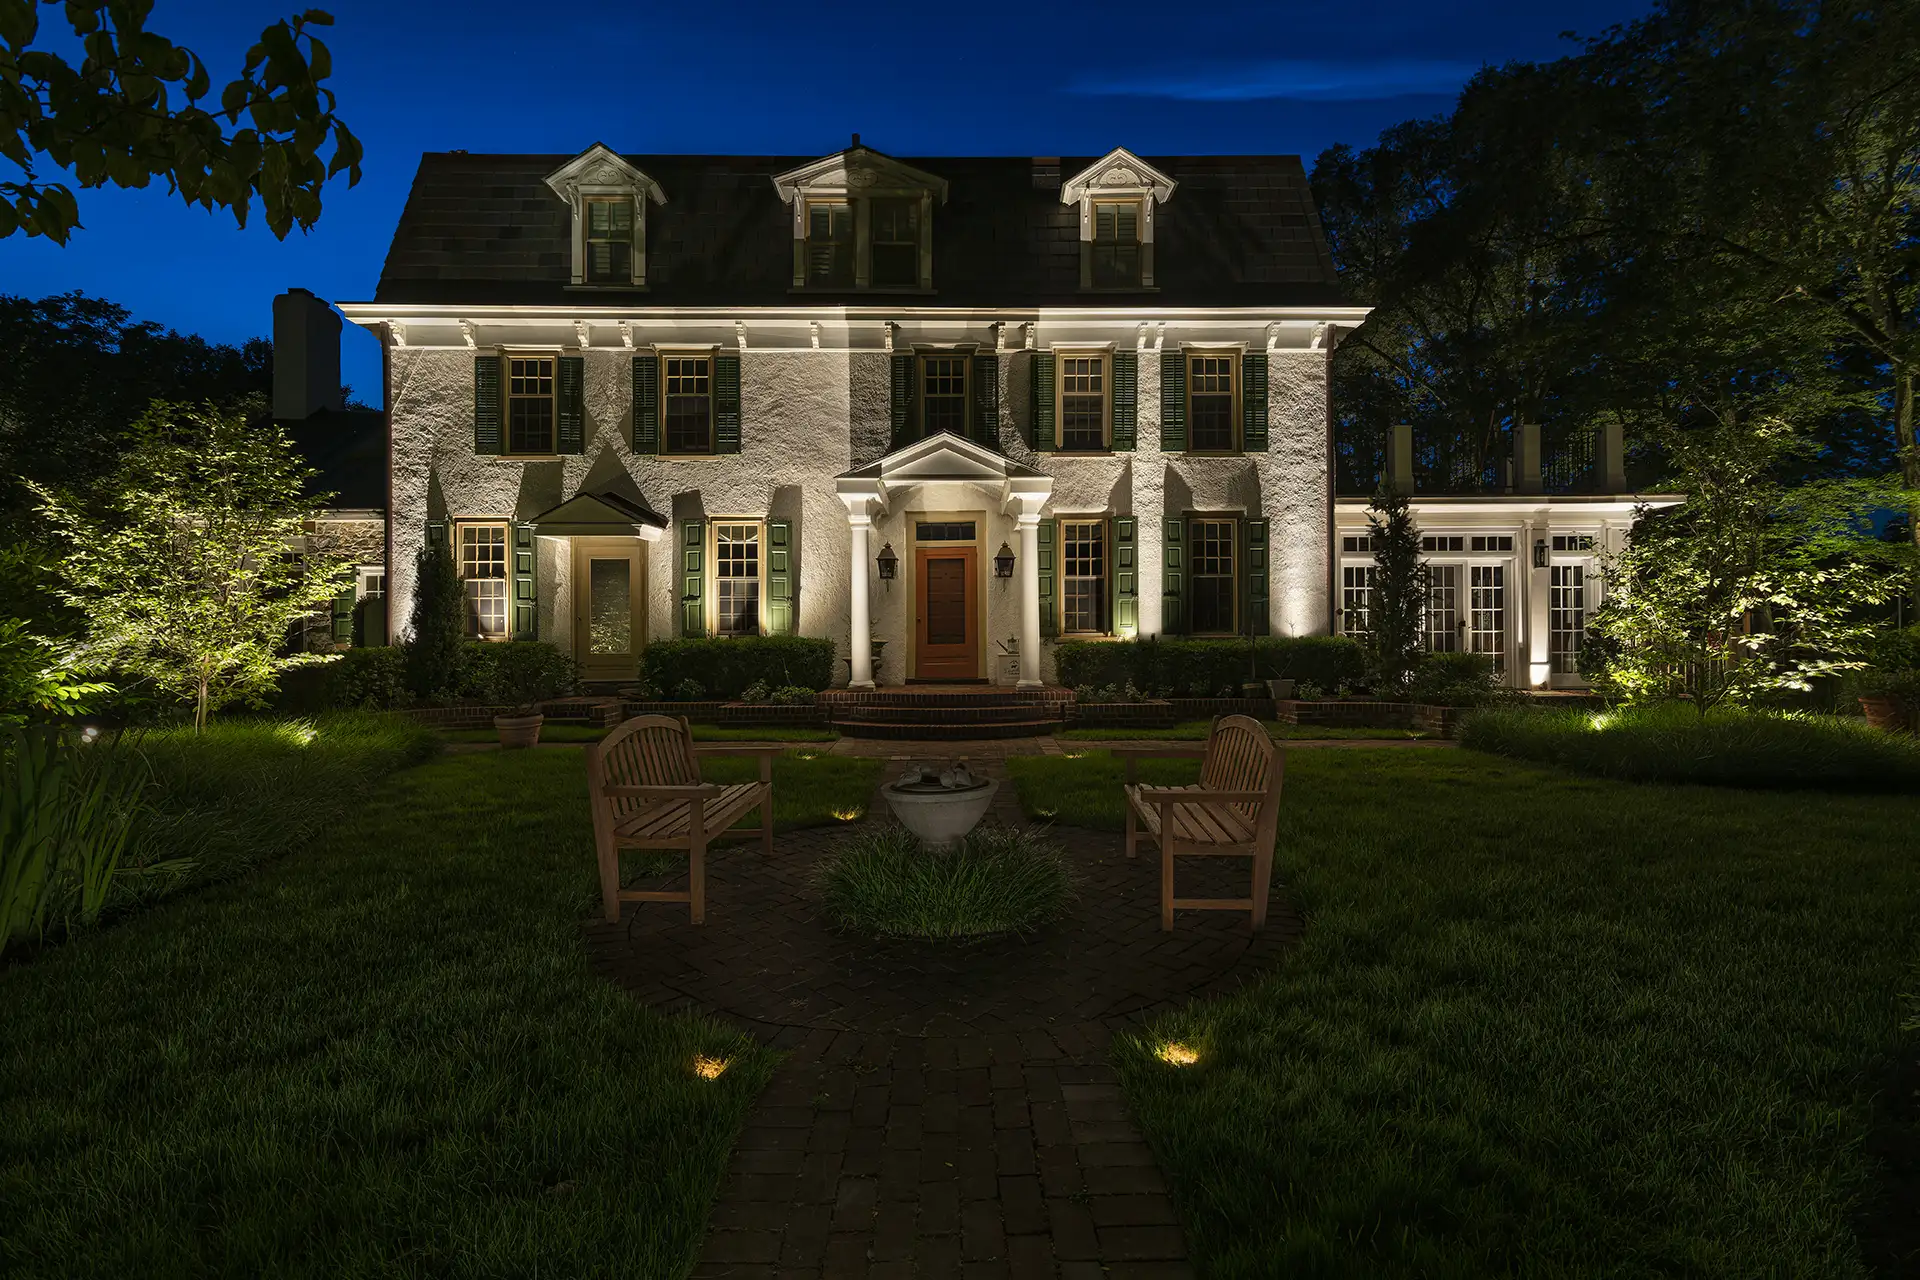 Falham Way image 7 Lighthouse Outdoor Lighting and Audio West Chester PA